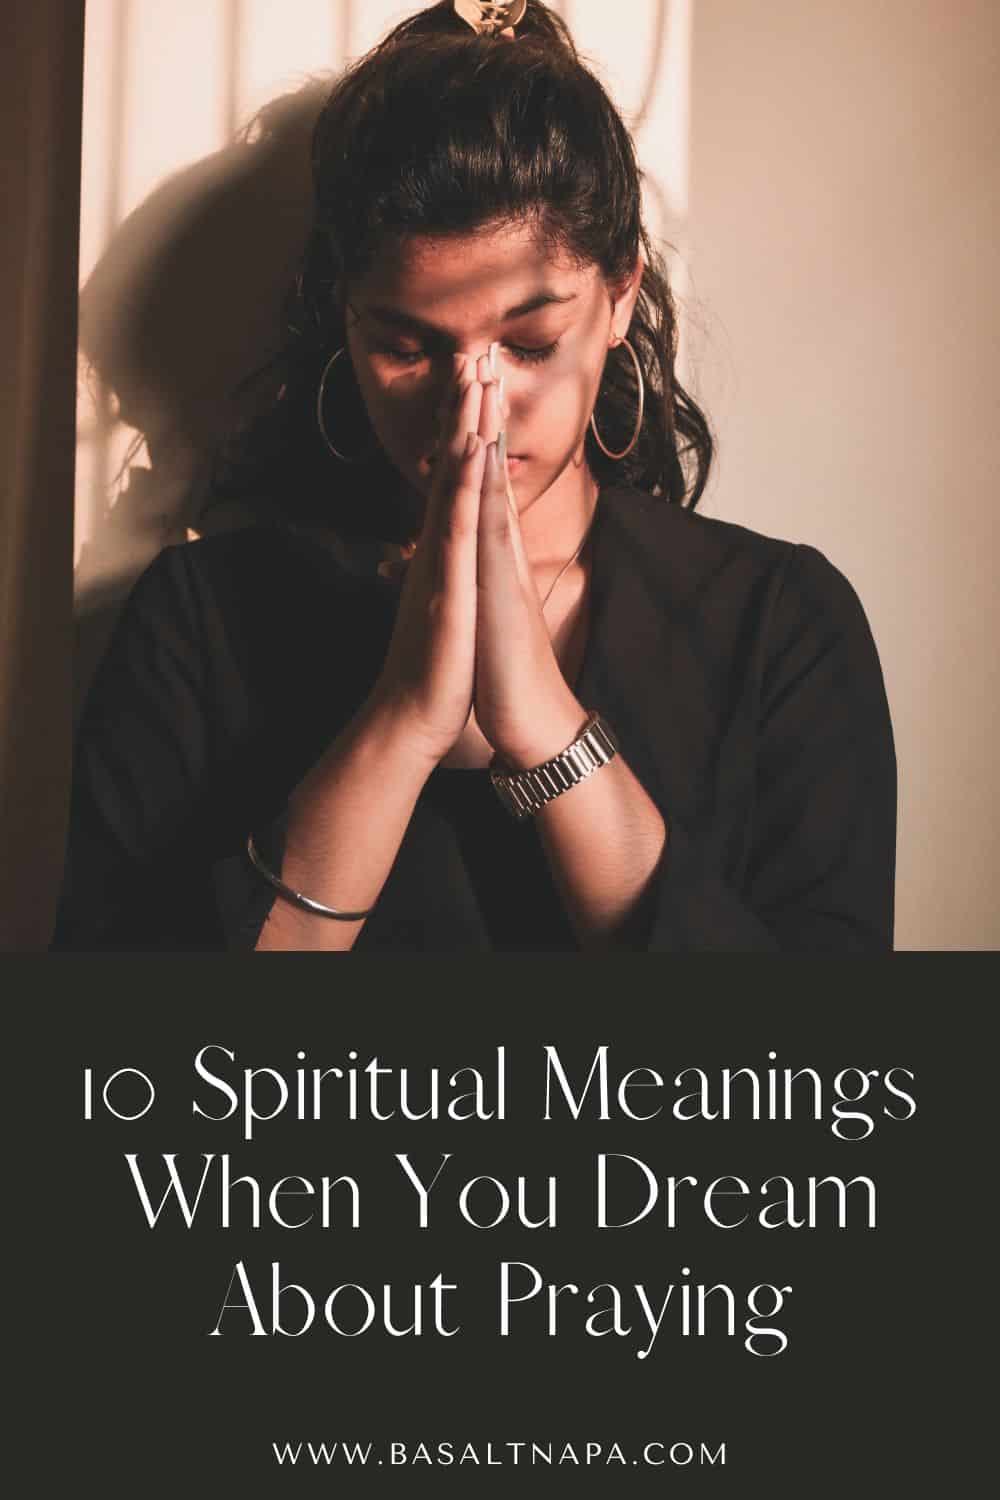 10 Spiritual Meanings When You Dream About Praying